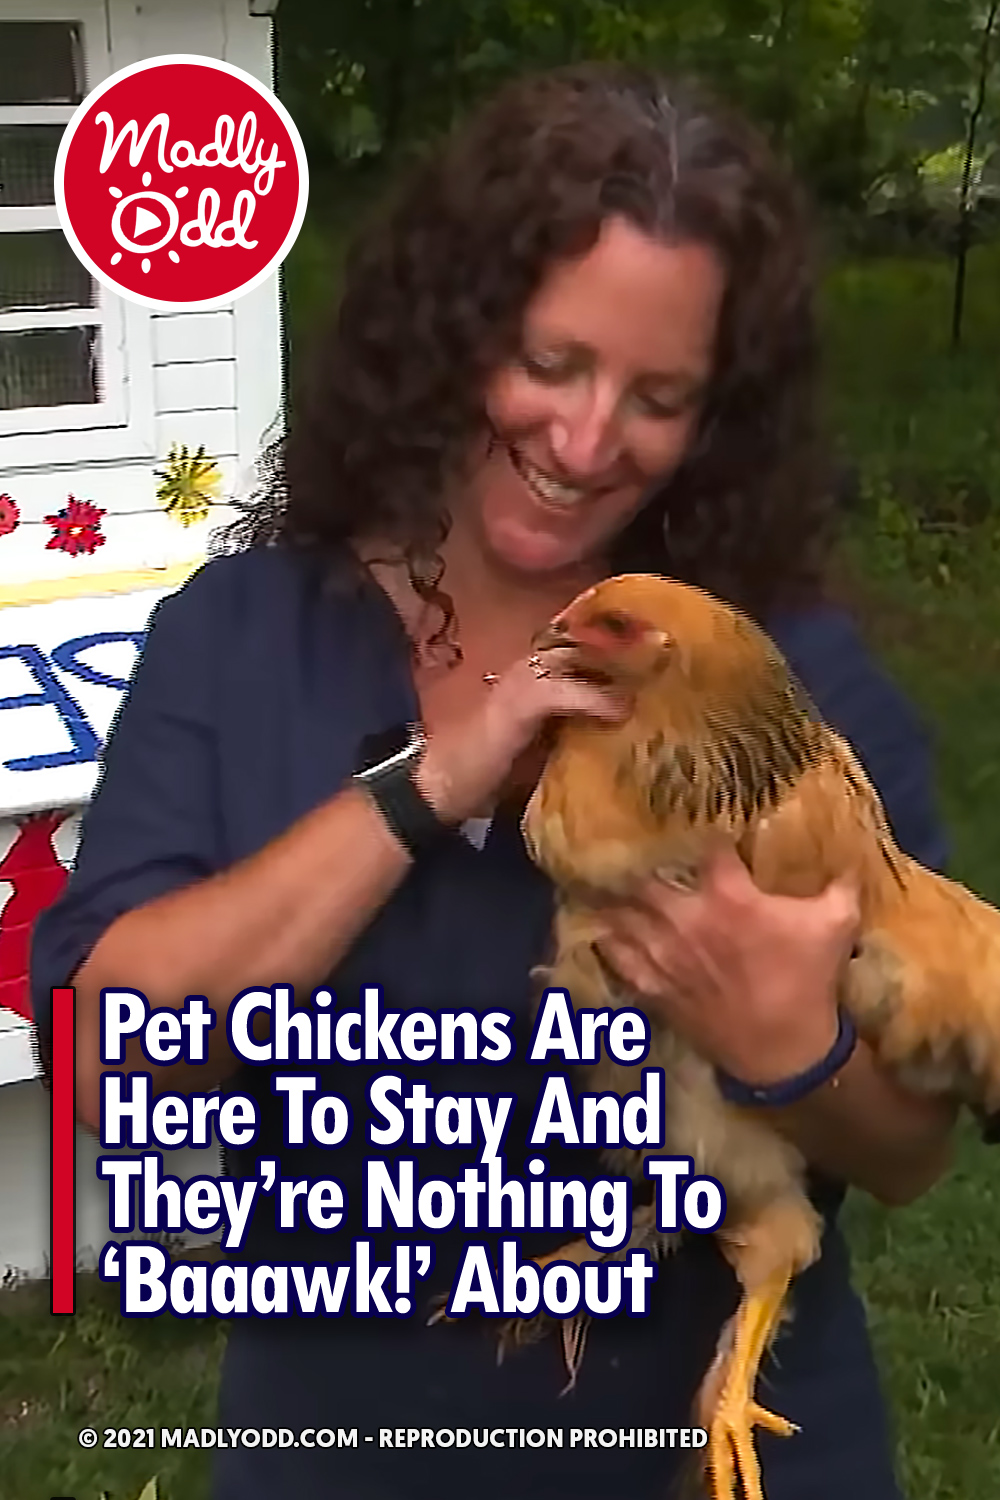 Pet Chickens Are Here To Stay And They’re Nothing To ‘Baaawk!’ About